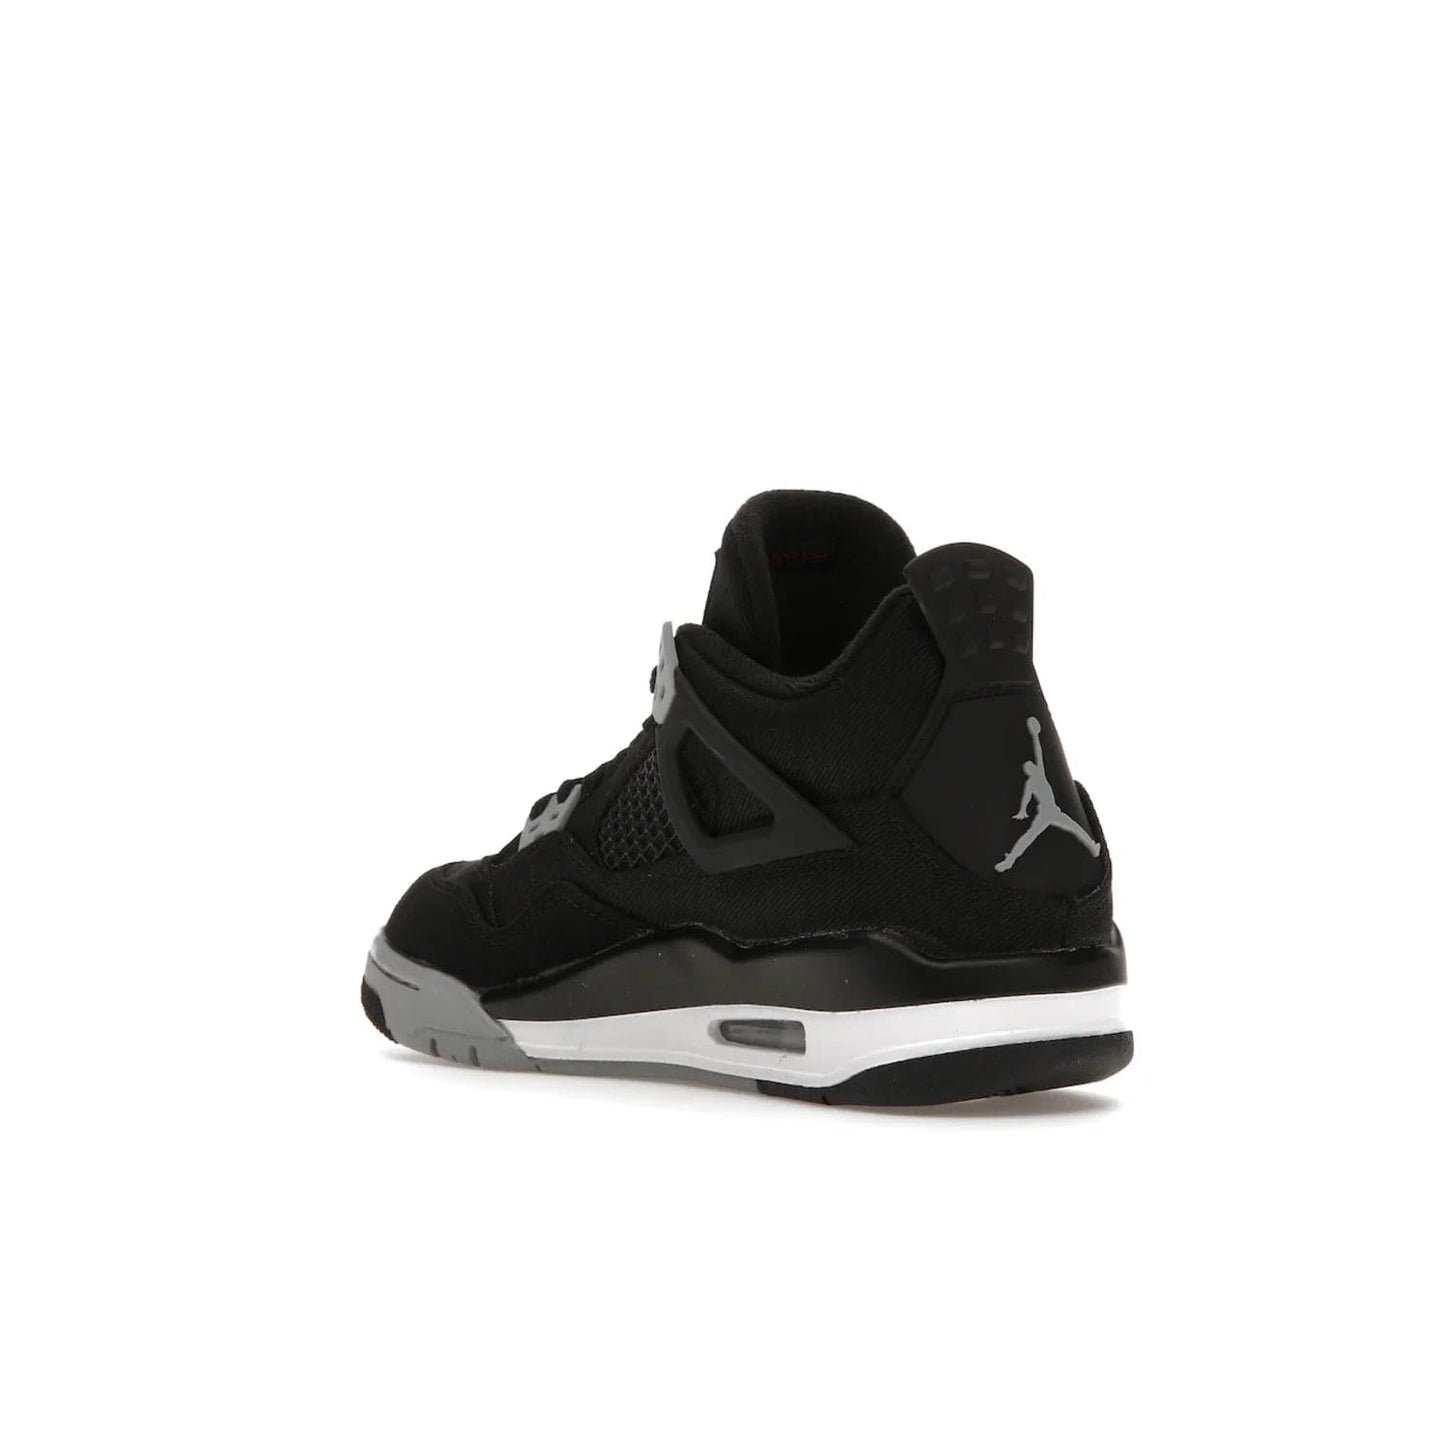 Jordan 4 Retro Black Canvas (GS) - Image 24 - Only at www.BallersClubKickz.com - Premium Air Jordan 4 Retro Black Canvas in grade-schooler's catalog. Featuring black suede canvas upper, grey molding, accents in red, white midsole, woven Jumpman tag, & visible AIR cushioning. Releasing Oct. 1, 2022.